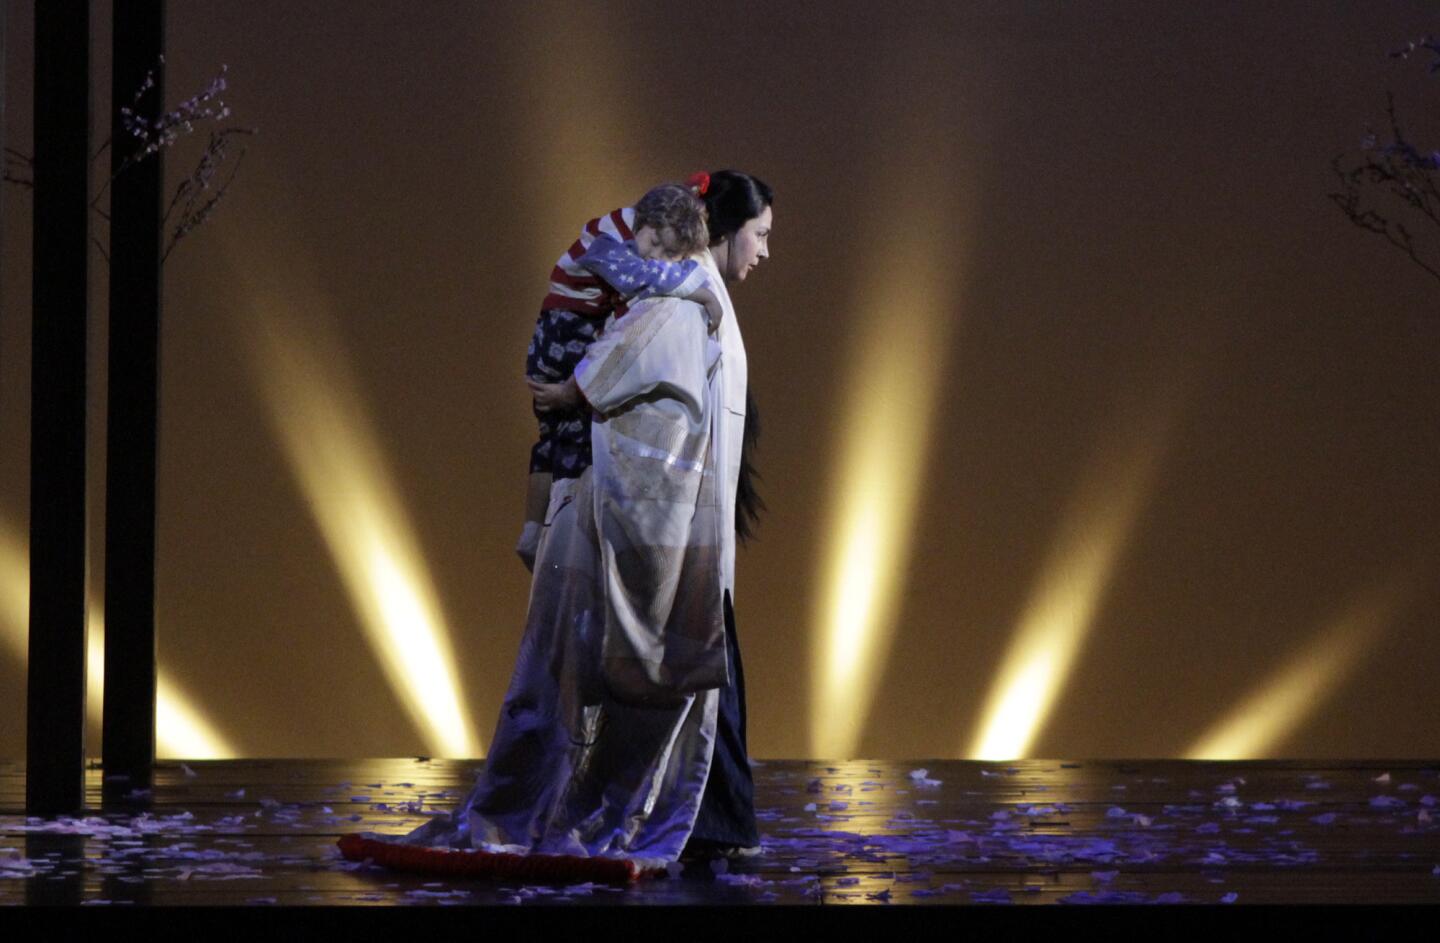 Oksana Dyka (Cio-Cio-San) and Garret Chang (Cio-Cio-San's child) in L.A. Opera's new production of Puccini's "Madame Butterfly" at the Dorothy Chandler Pavilion.